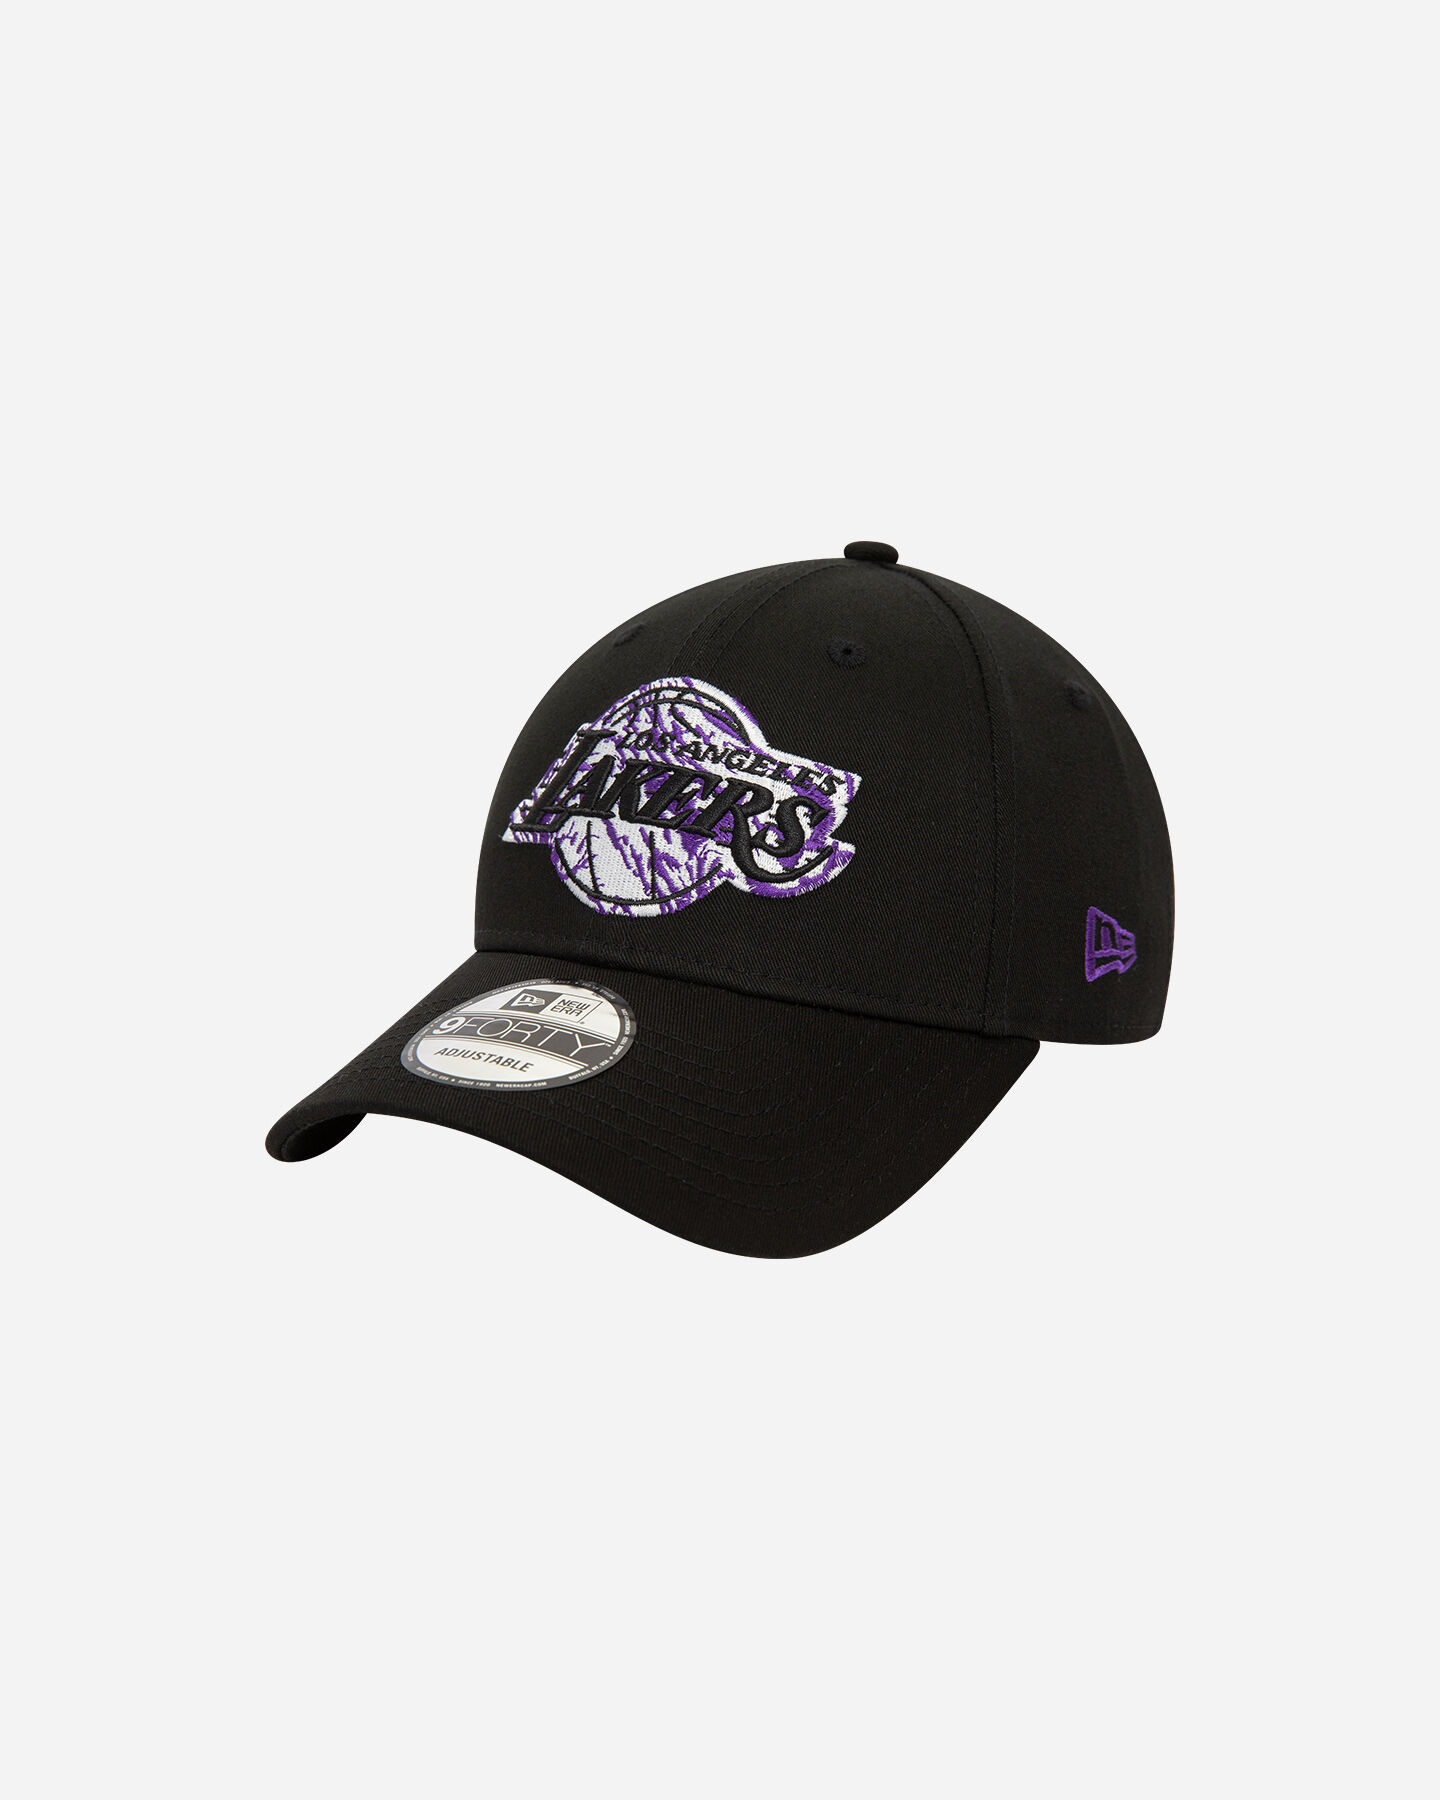  Cappellino NEW ERA 9FORTY INFILL LAKERS M S5670810|001|OSFM scatto 0